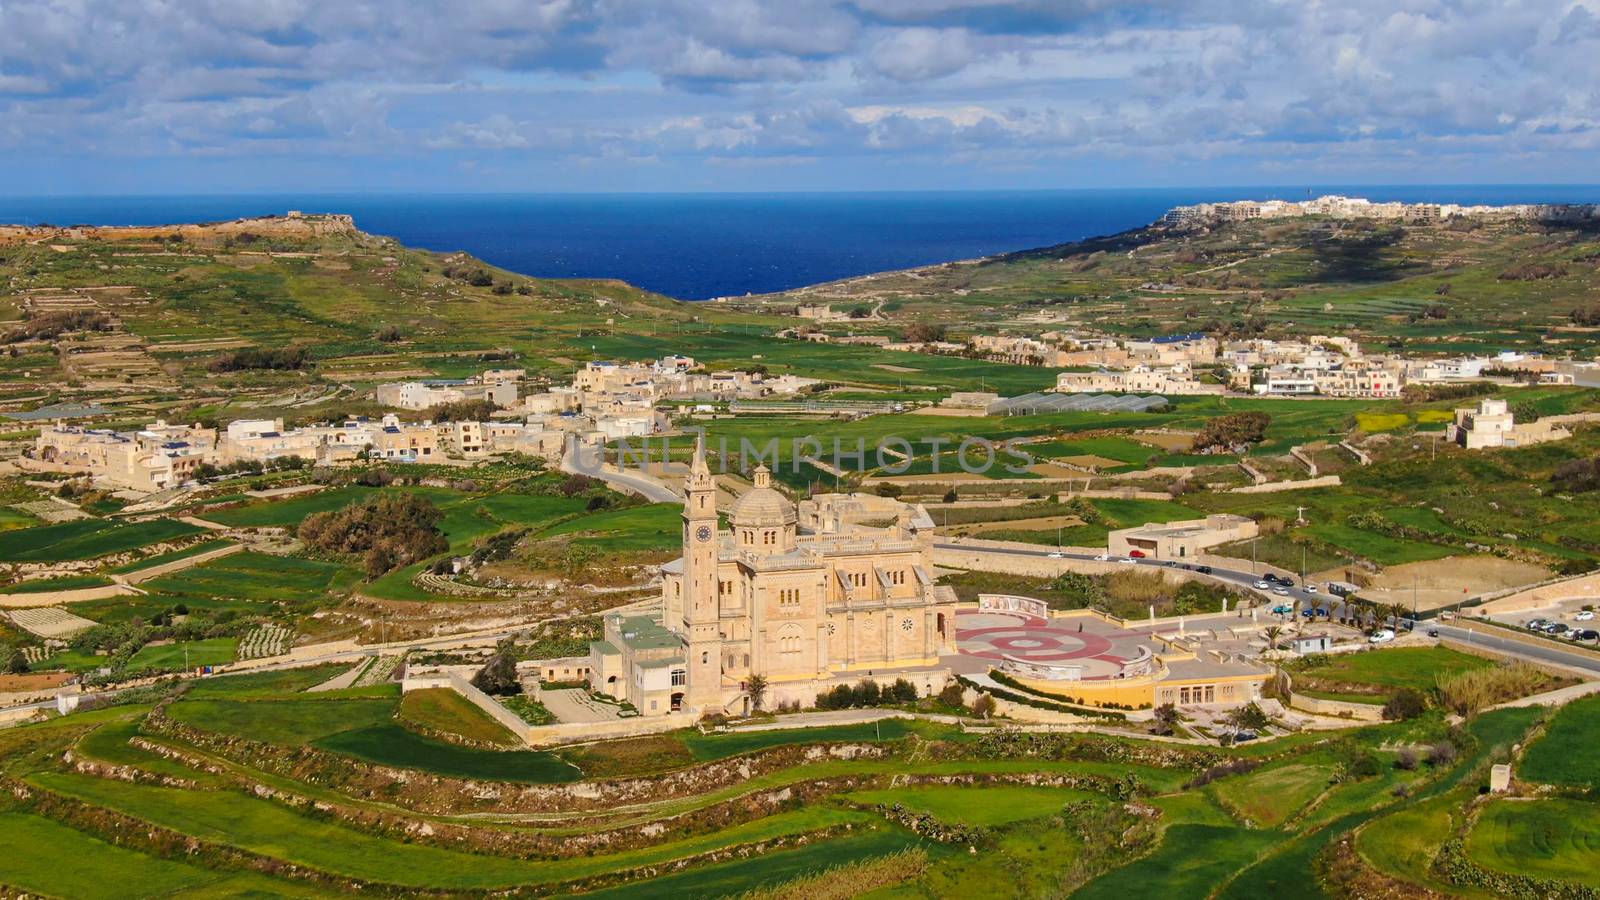 The Island of Gozo - Malta from above by Lattwein